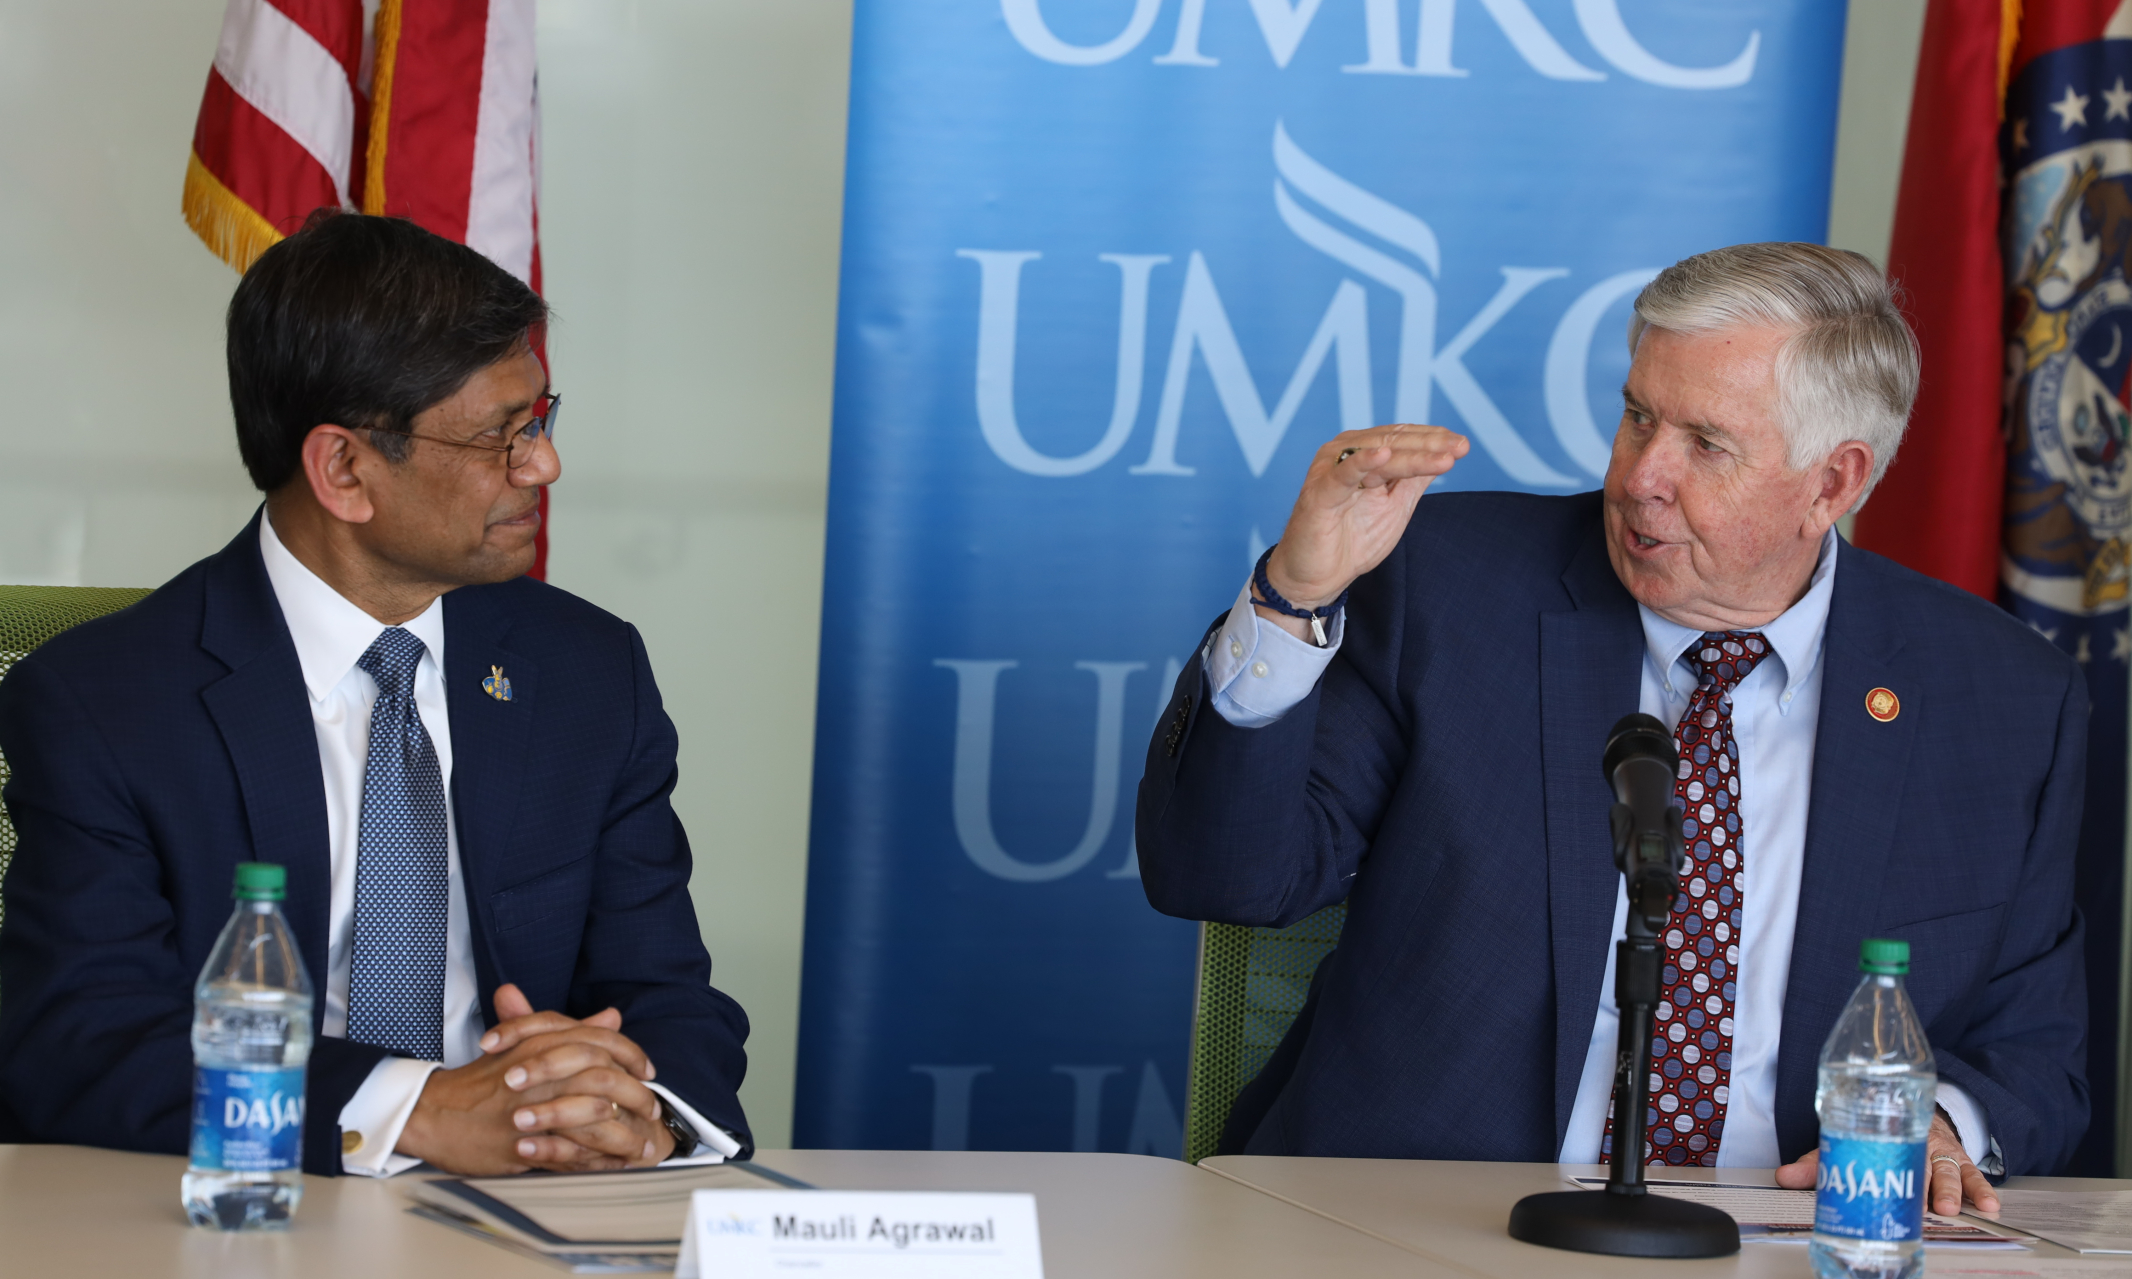 Chancellor C. Mauli Agrawal sits with Governor Mike Parson at a table